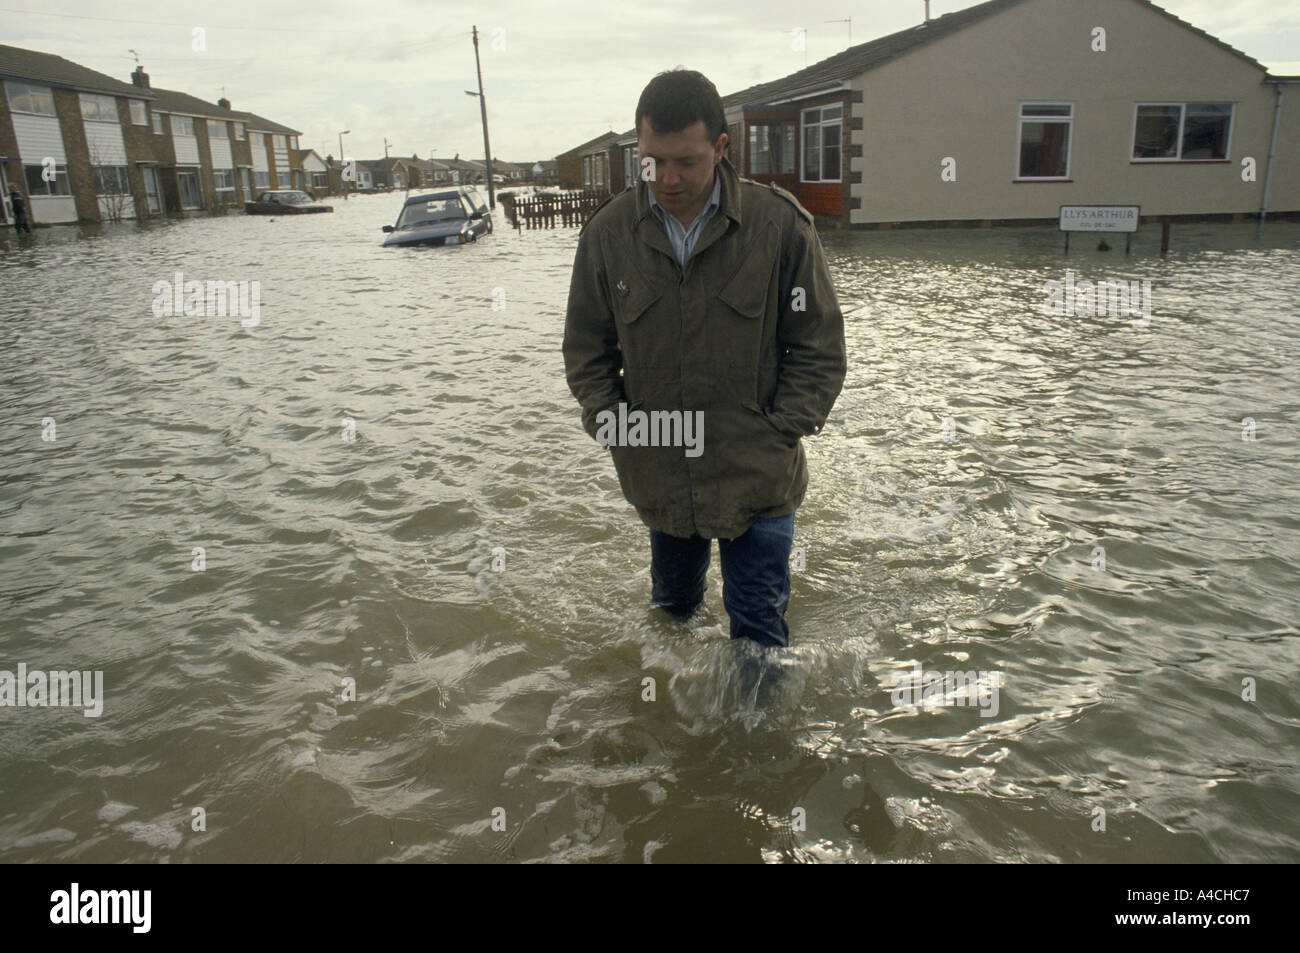 Wading through his flooded street after Hurricane winds cause the sea wall at Towyn, North Wales to be break flooding the town, Feb 1990. Stock Photo